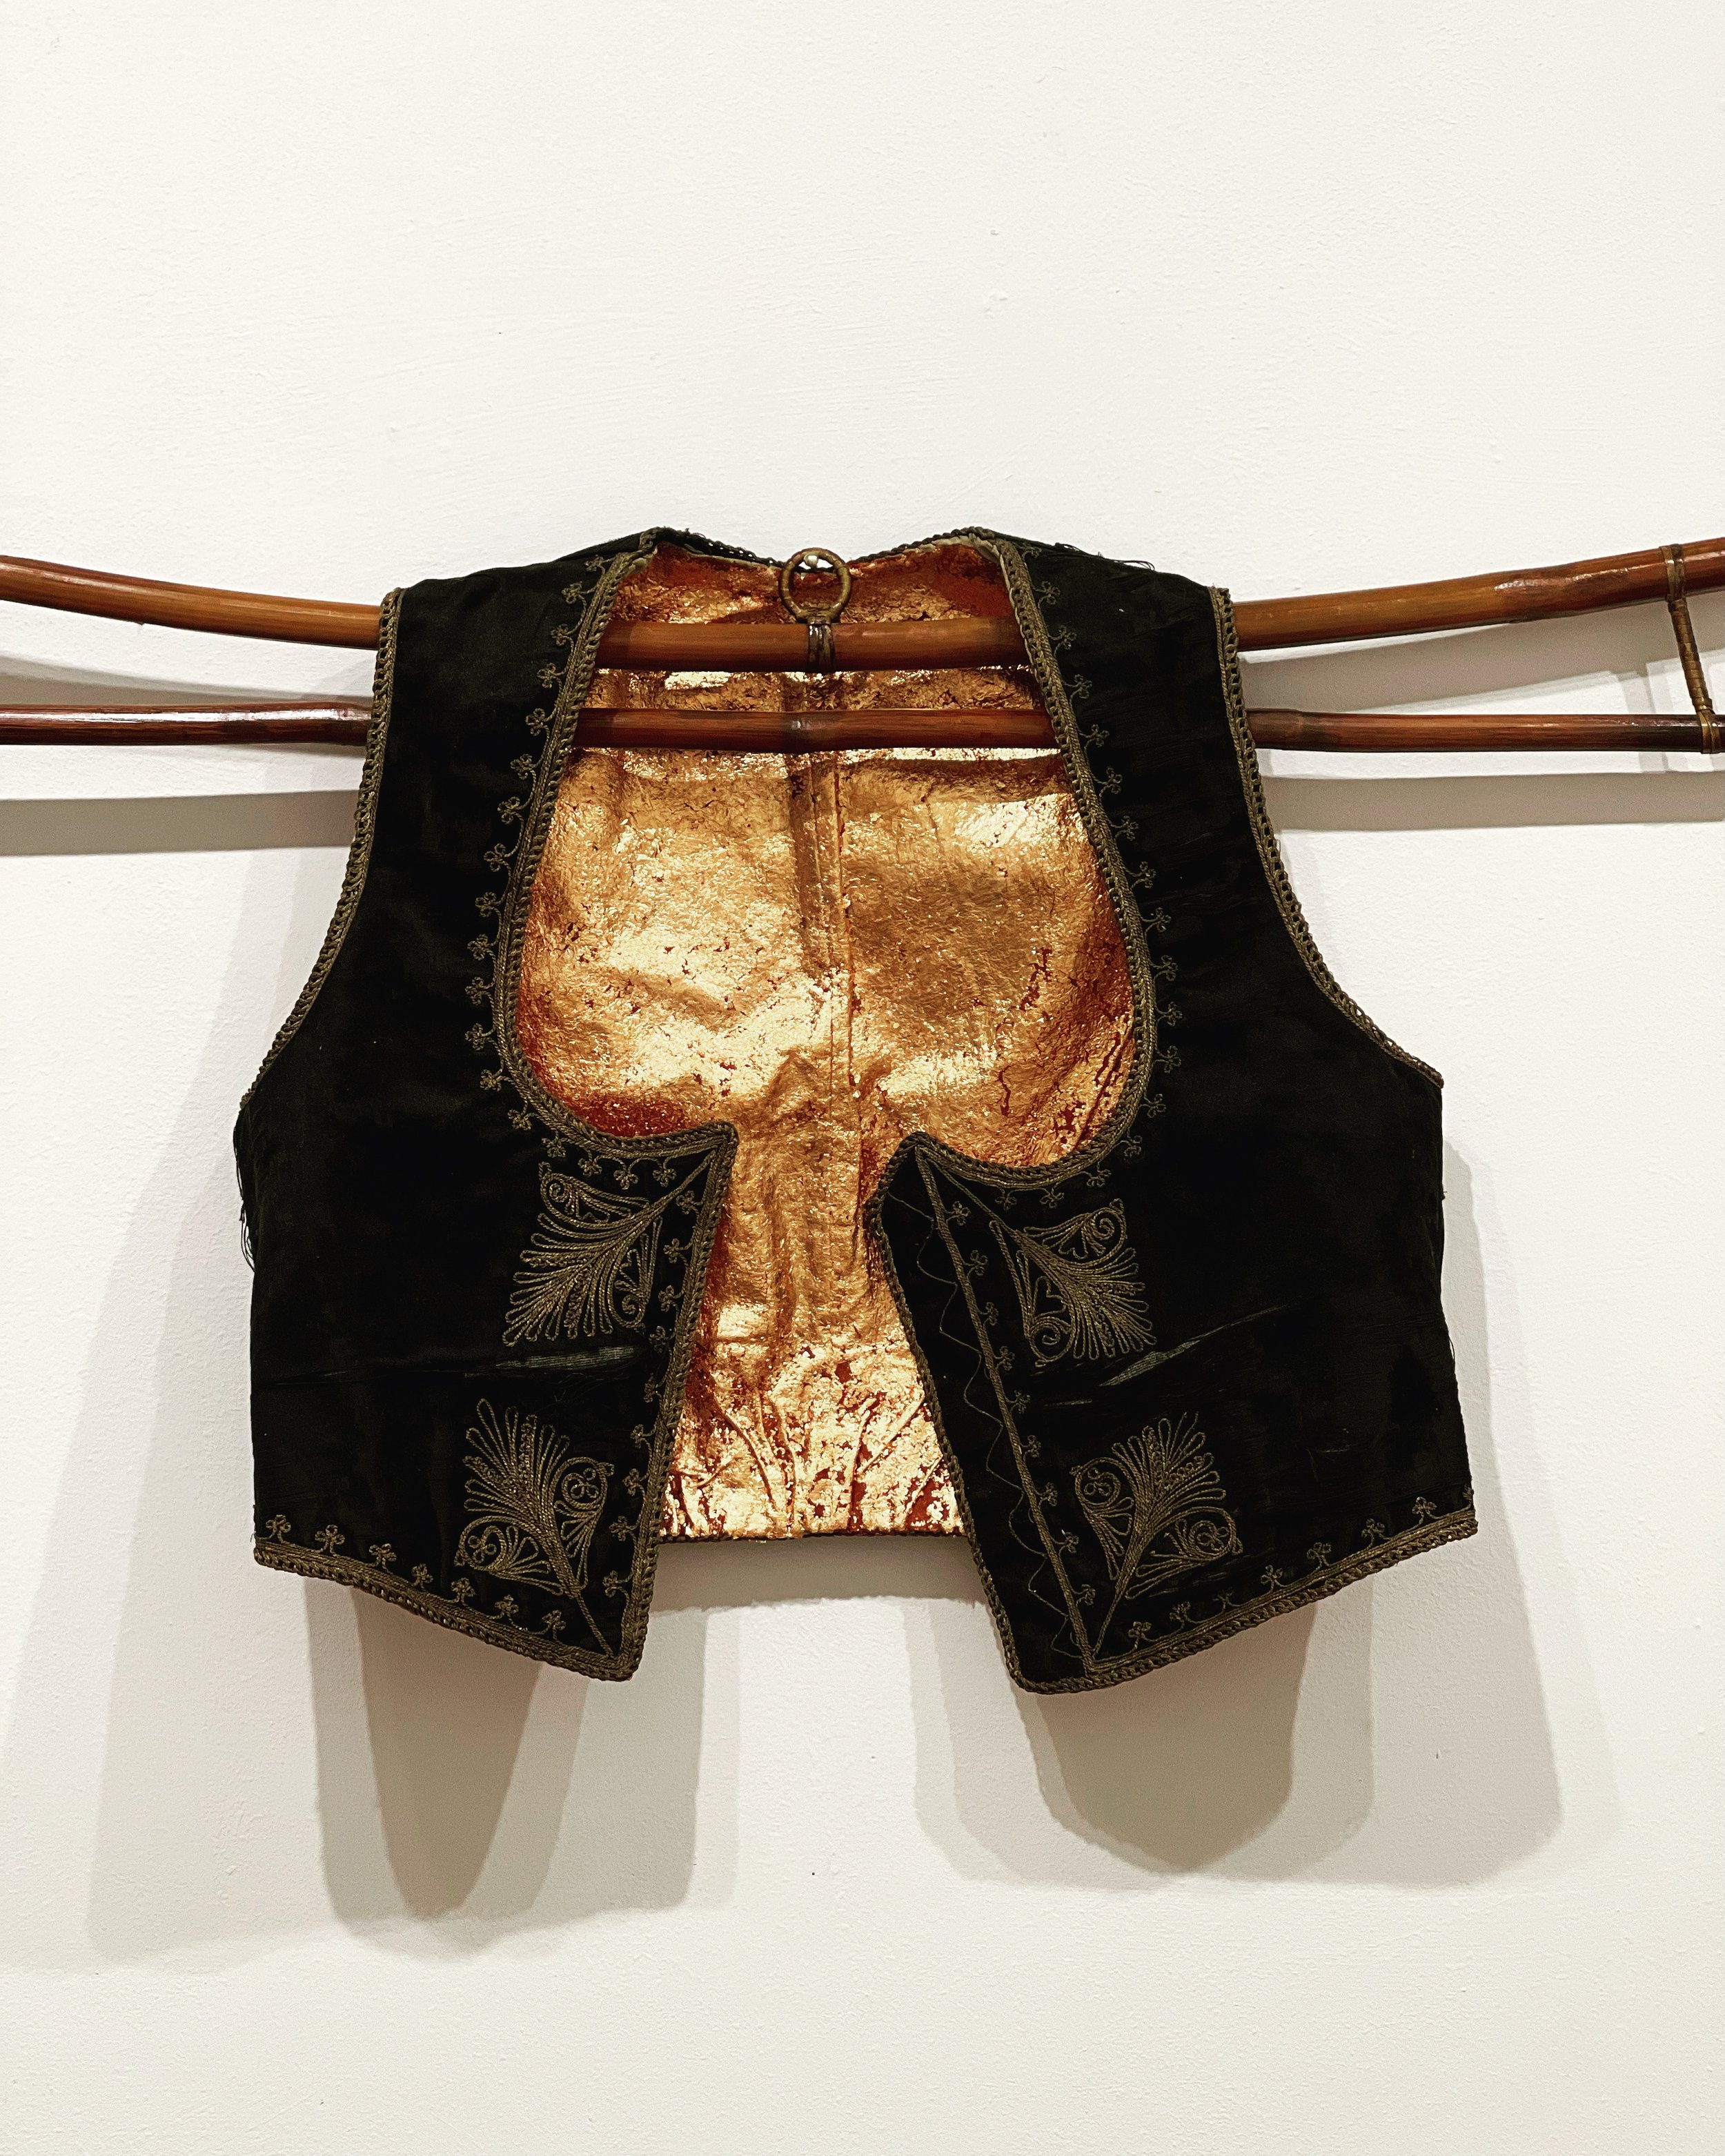   Vested Interest , 2022  Velvet, silk, cotton, copper gilding  15 x 16 inches   $610.   An antique woman’s velvet and silk vest covered with copper gilding and displayed on a bamboo hanger.  